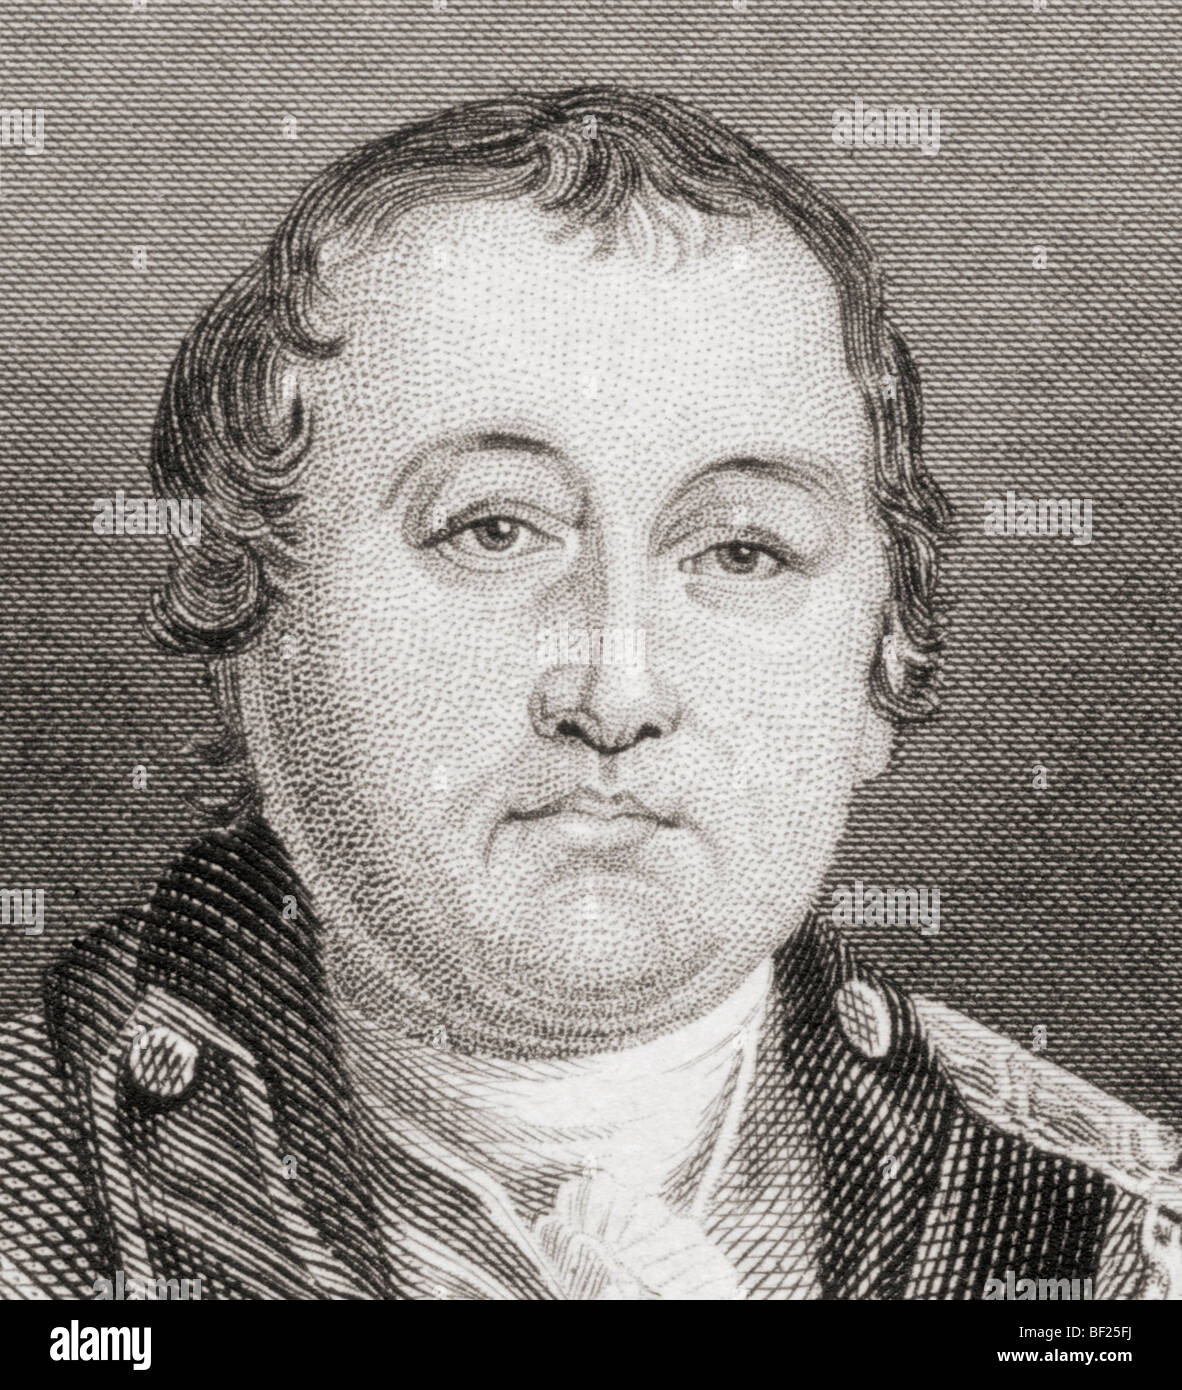 William Washington, 1752 to 1810. American officer of the Continental Army during the American Revolutionary War. Stock Photo